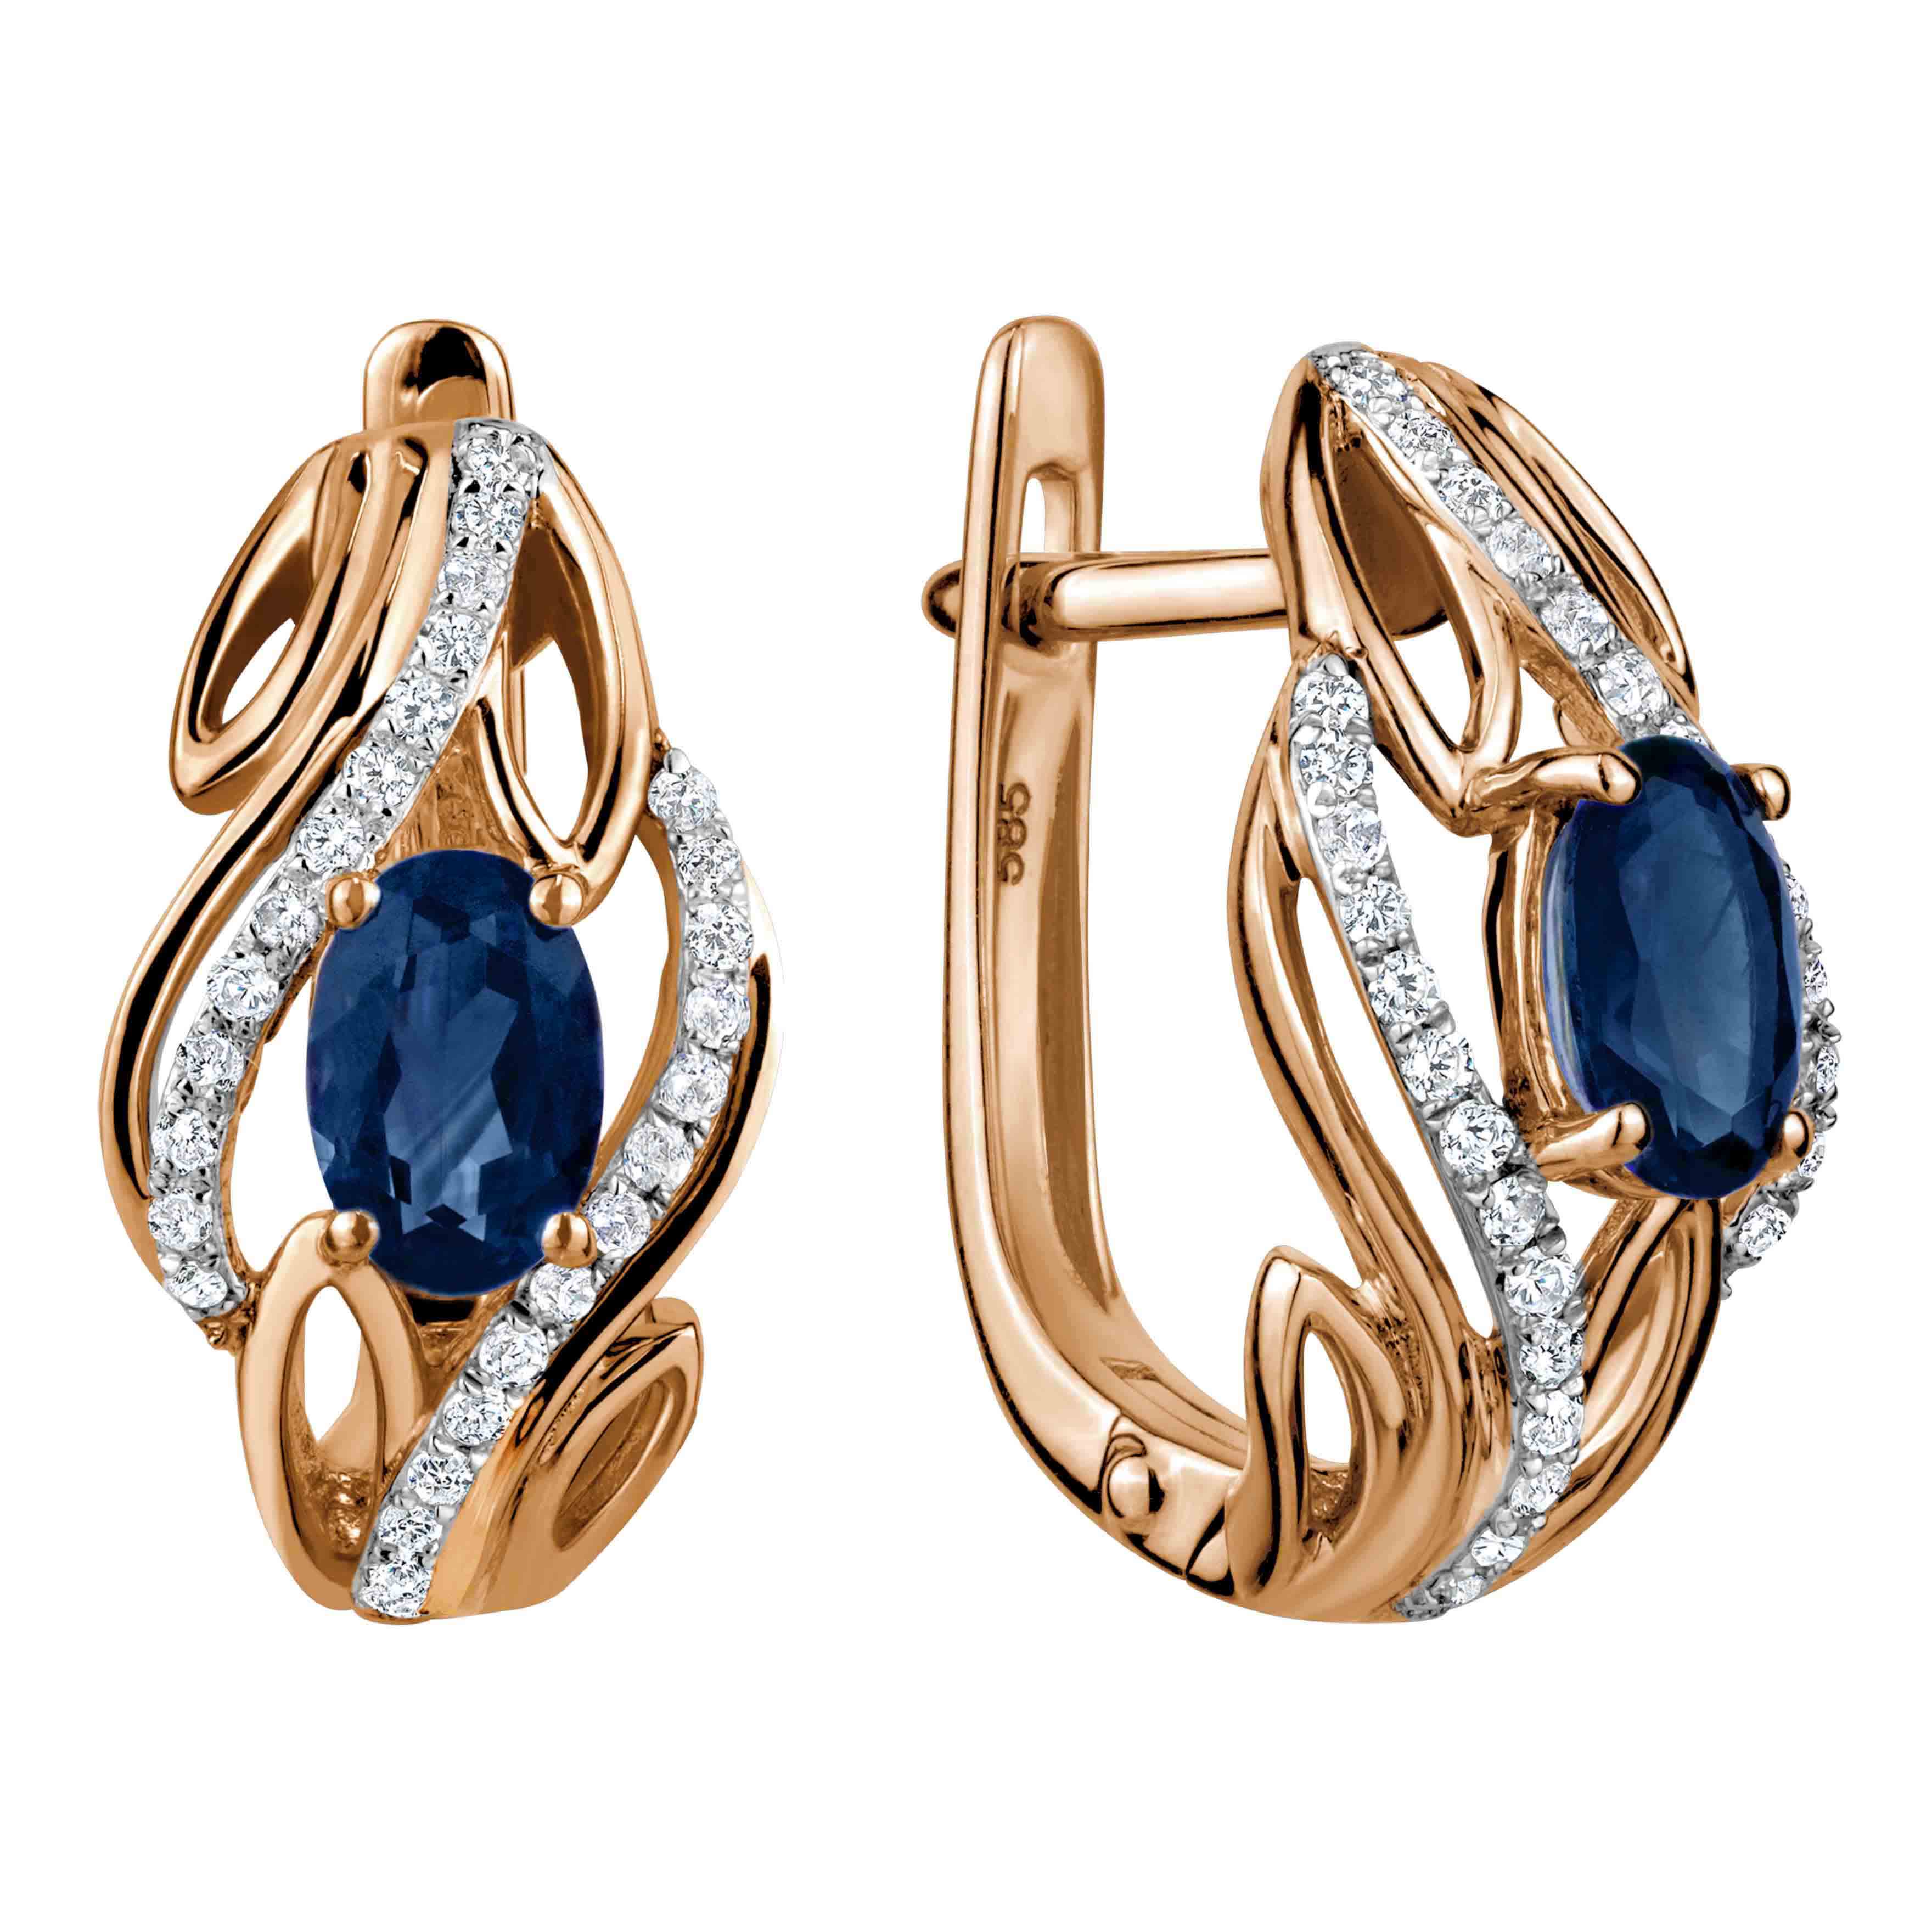 Female earrings with oval sapphires and diamonds in 14K Russian